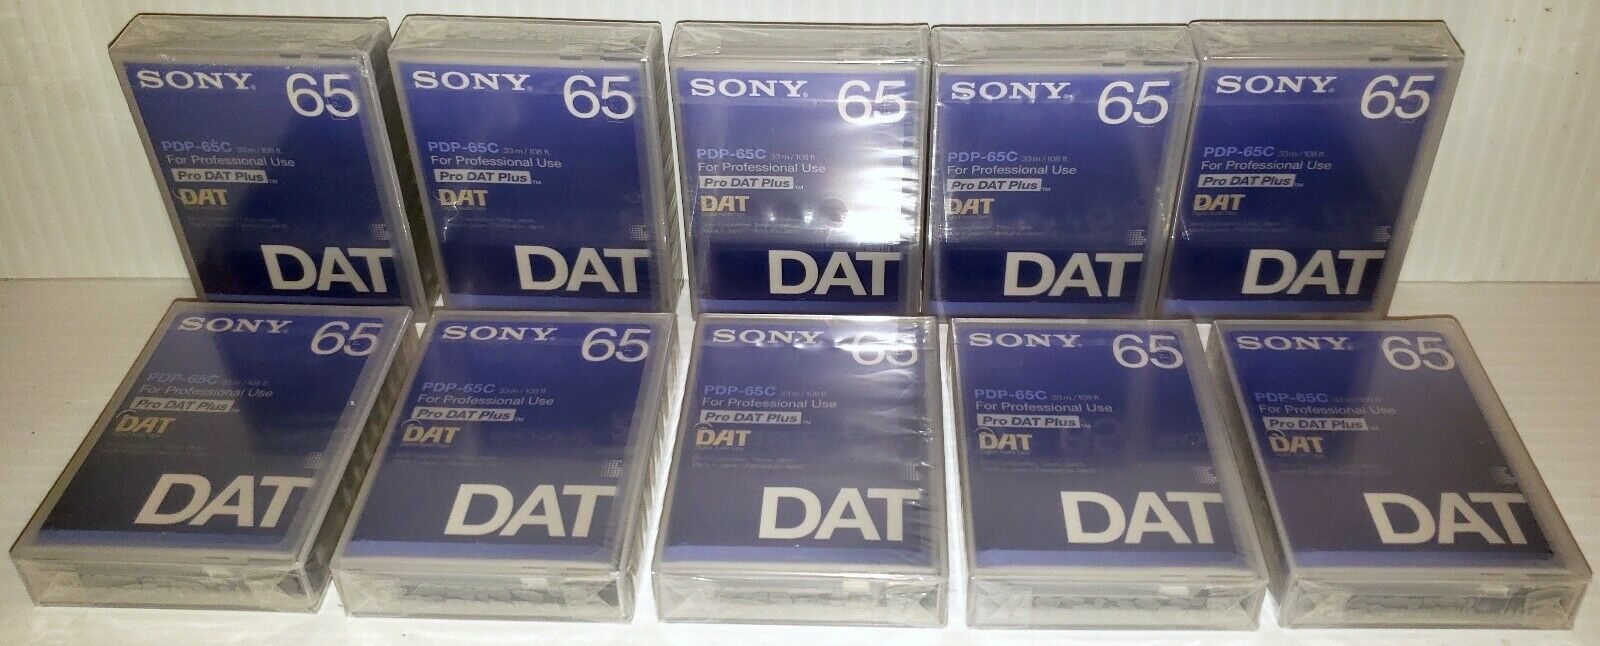 NEW & SEALED (LOT OF 10) SONY PDP-65C DAT Digital Audio Tape/Tapes Pro DAT PLUS